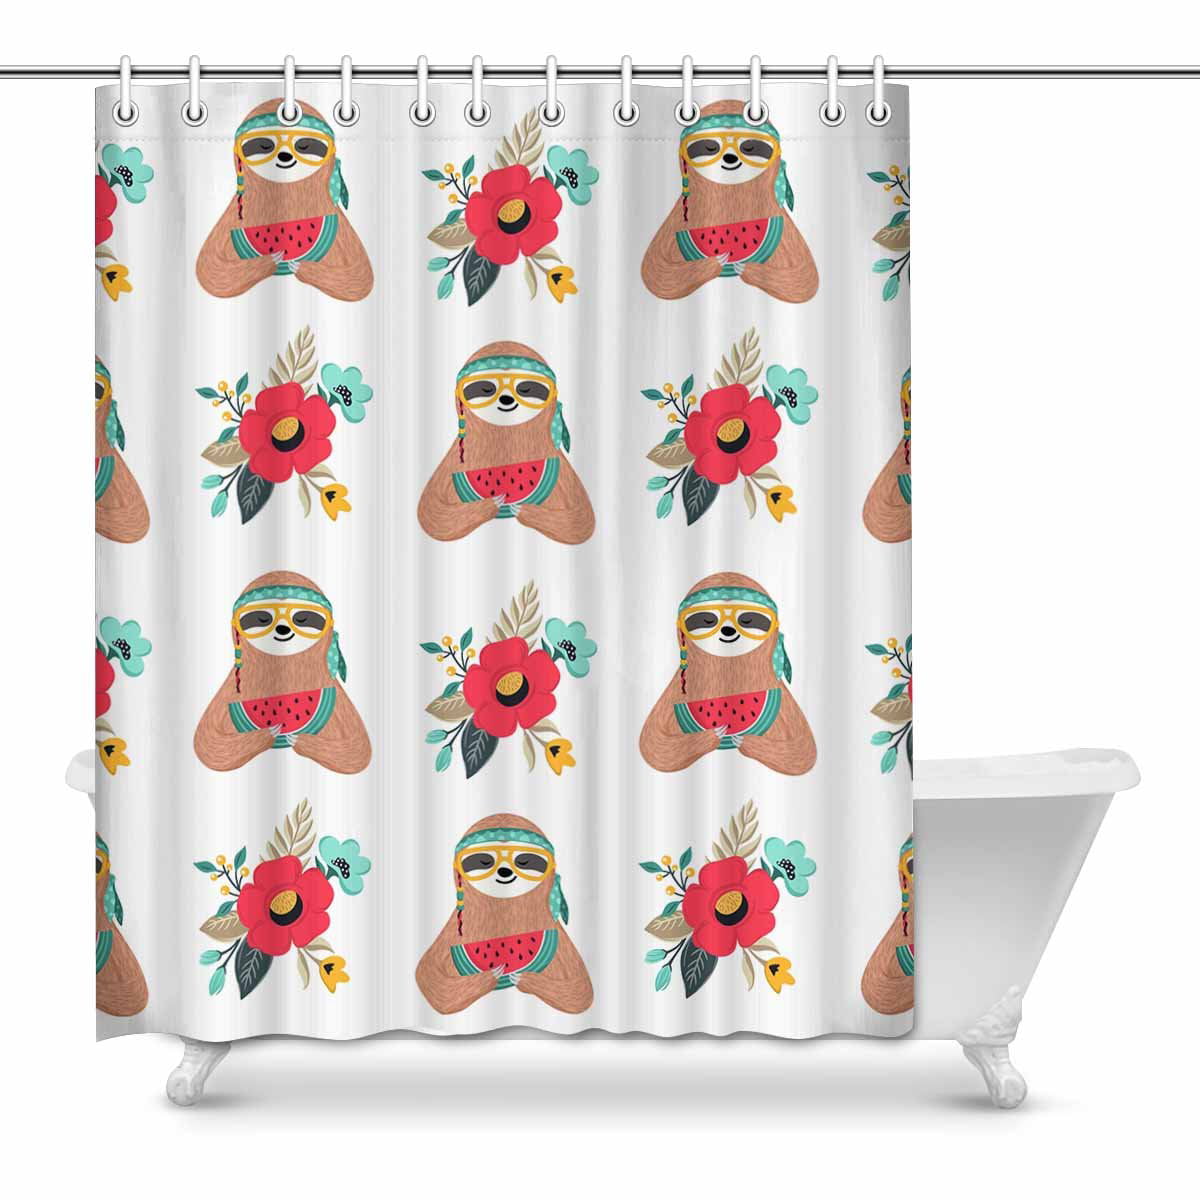 Looney Tunes Character Custom Print Shower Curtain Size 48x72 60x72 66x72 Inch 